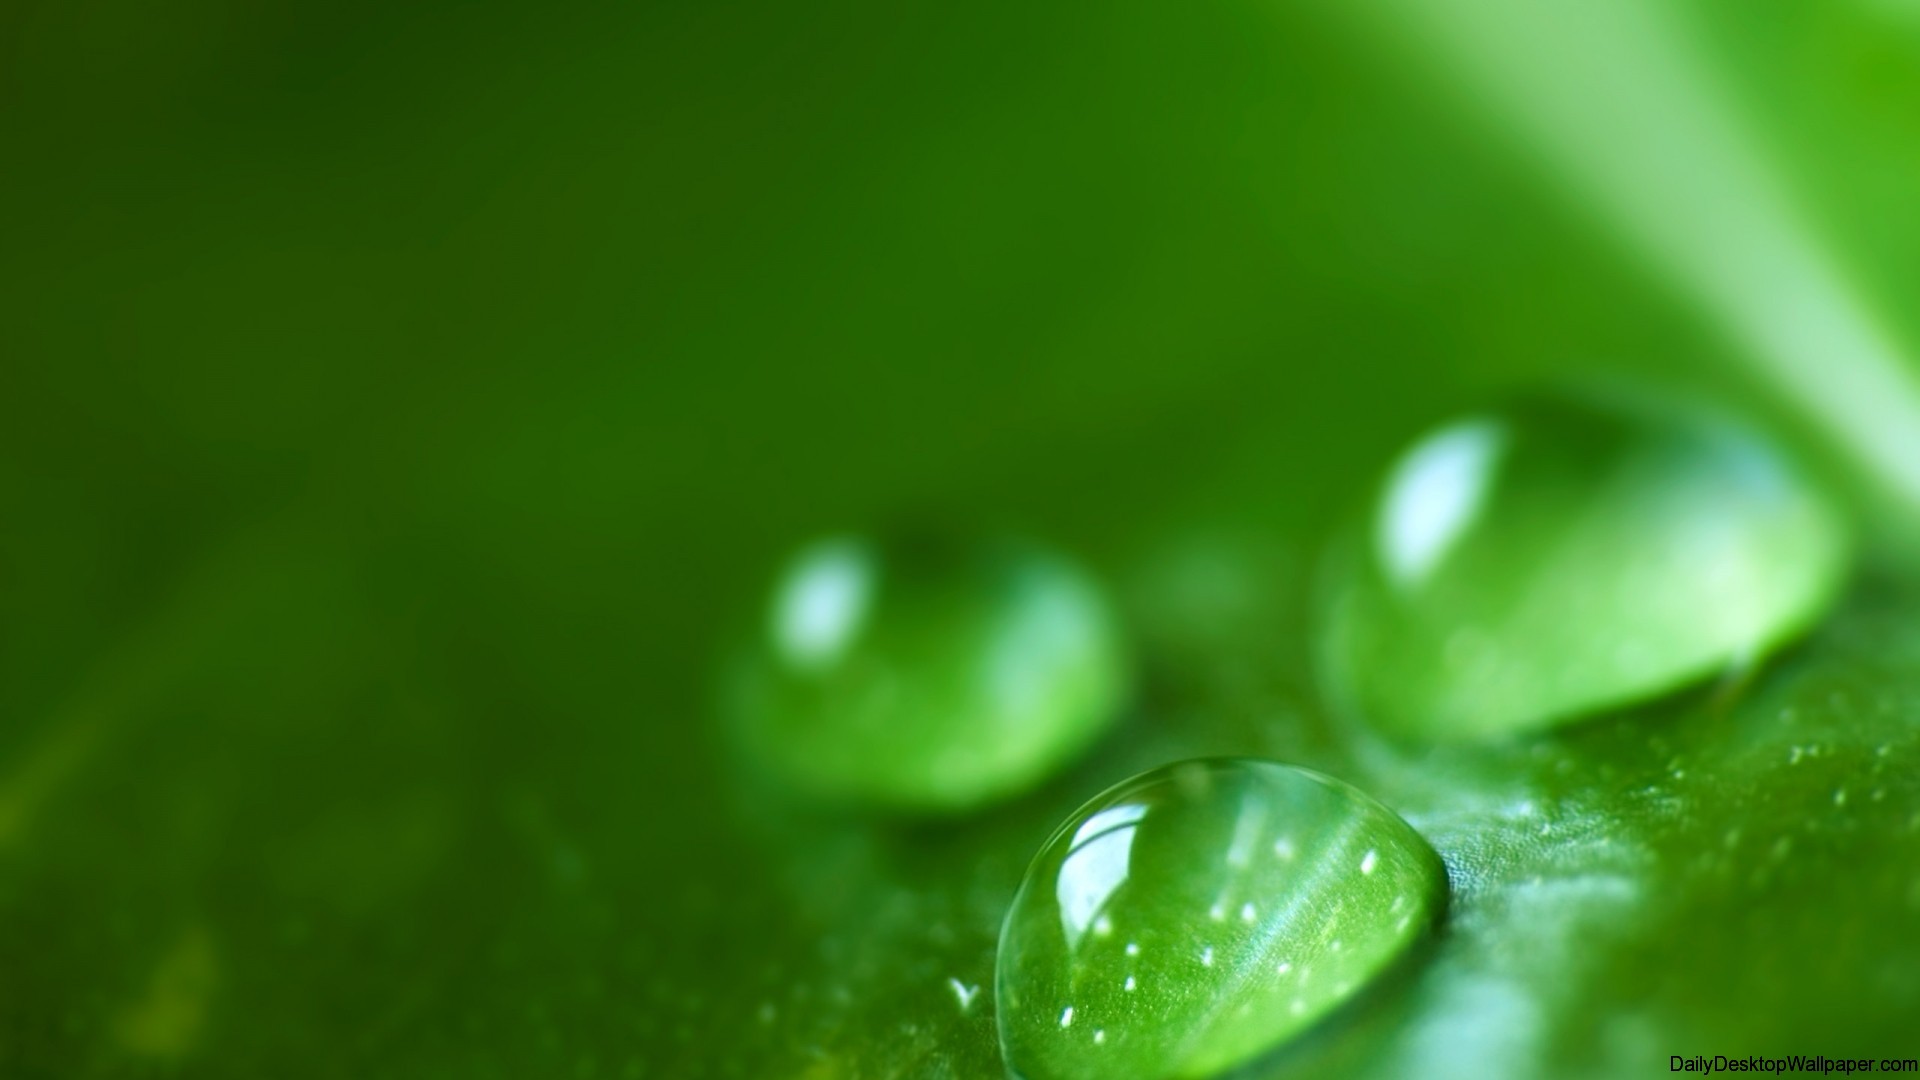 Up Close Water Droplet wallpaper - HD Wallpapers